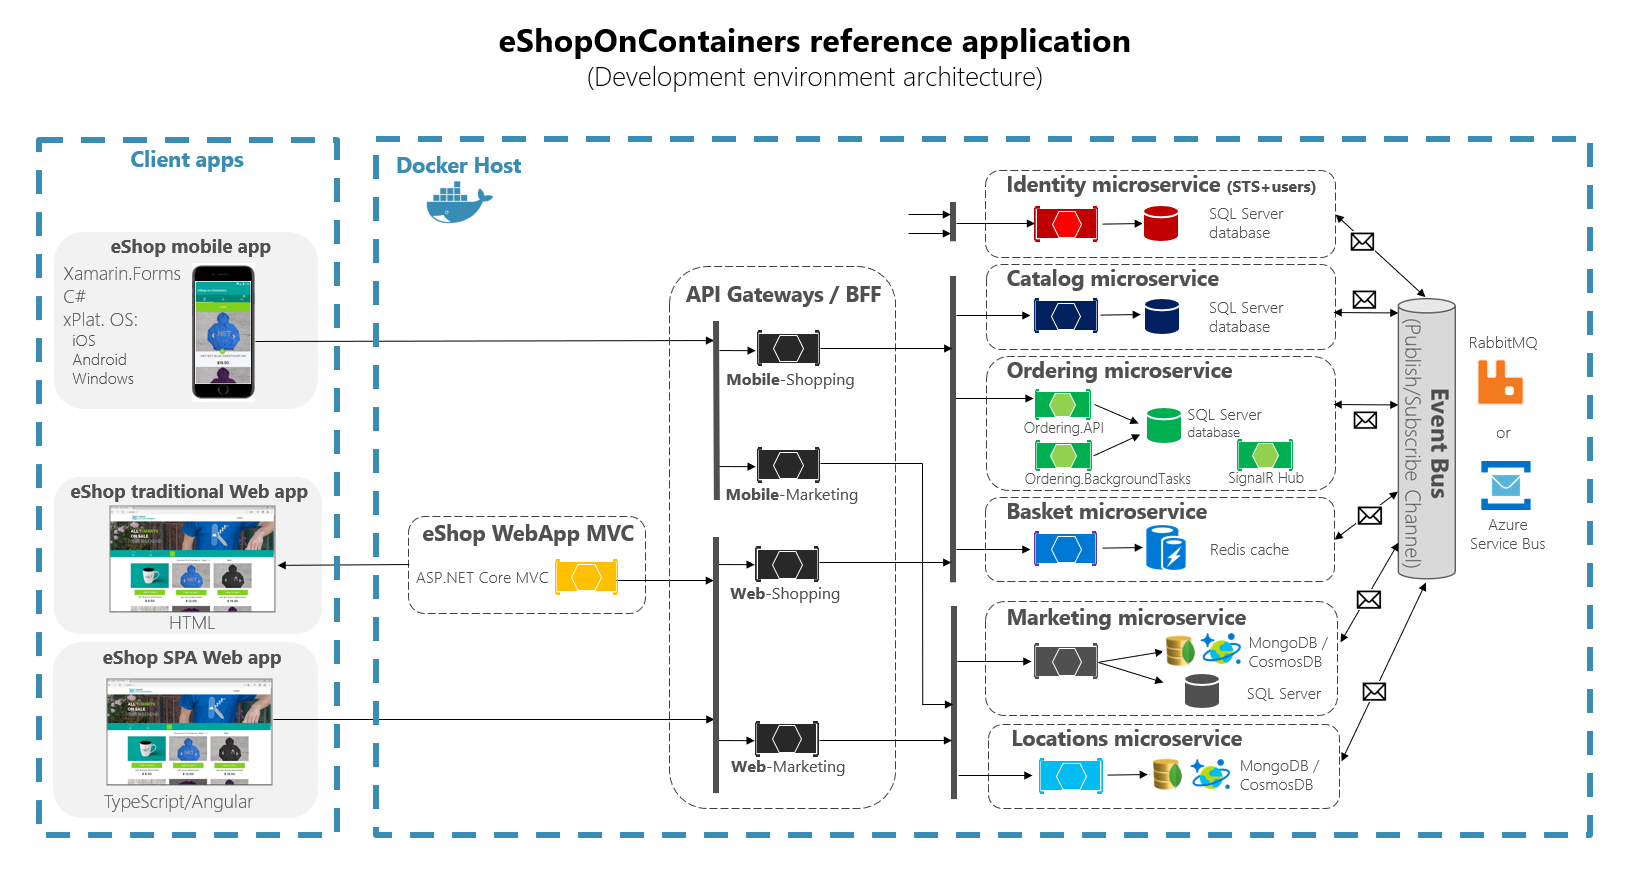 Diagram showing the eShopOnContainers architecture.